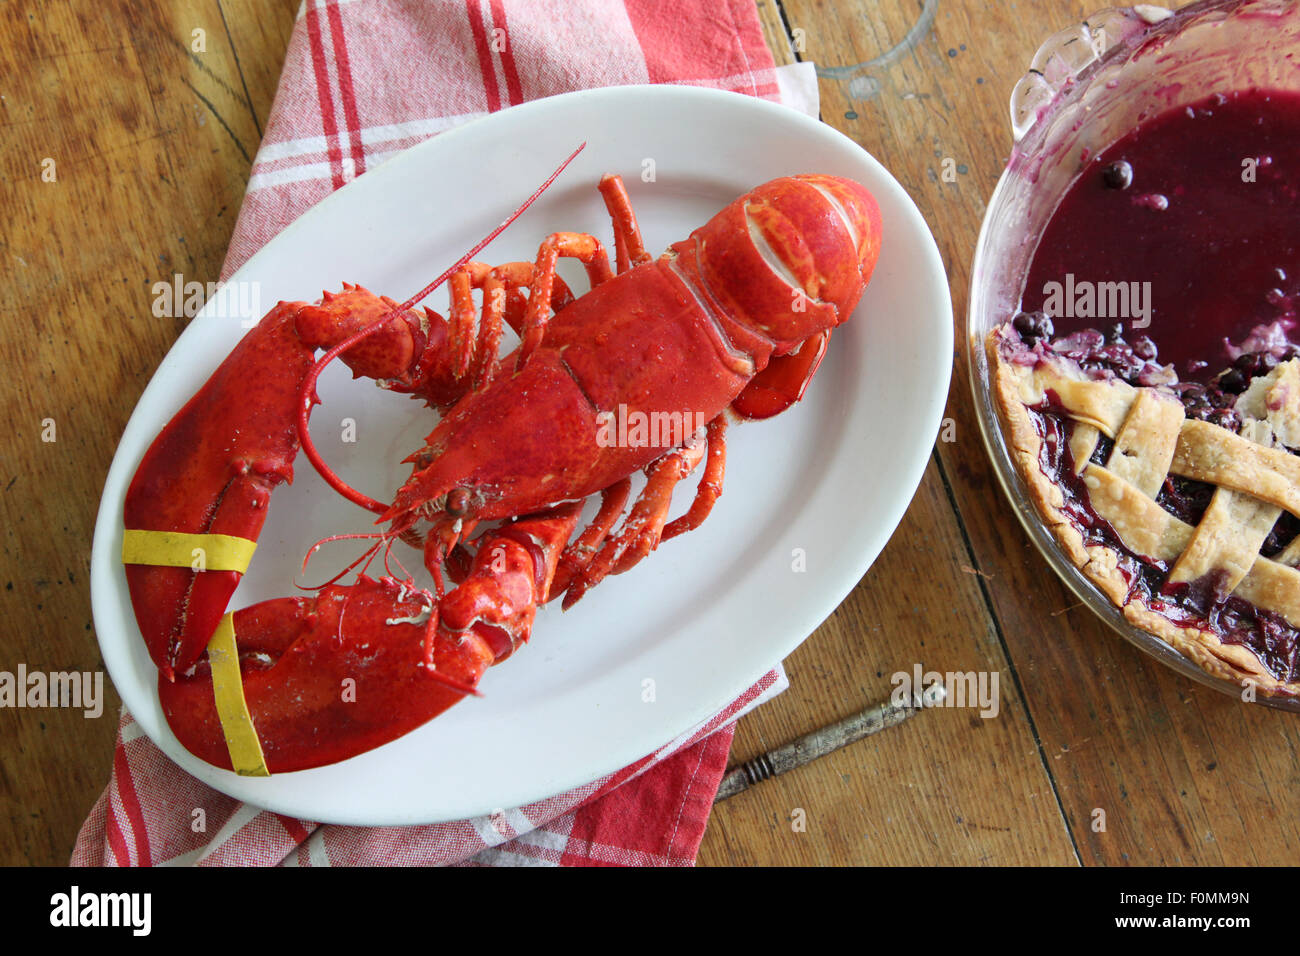 Maine lobster with blue berry pie, a new england meal Stock Photo